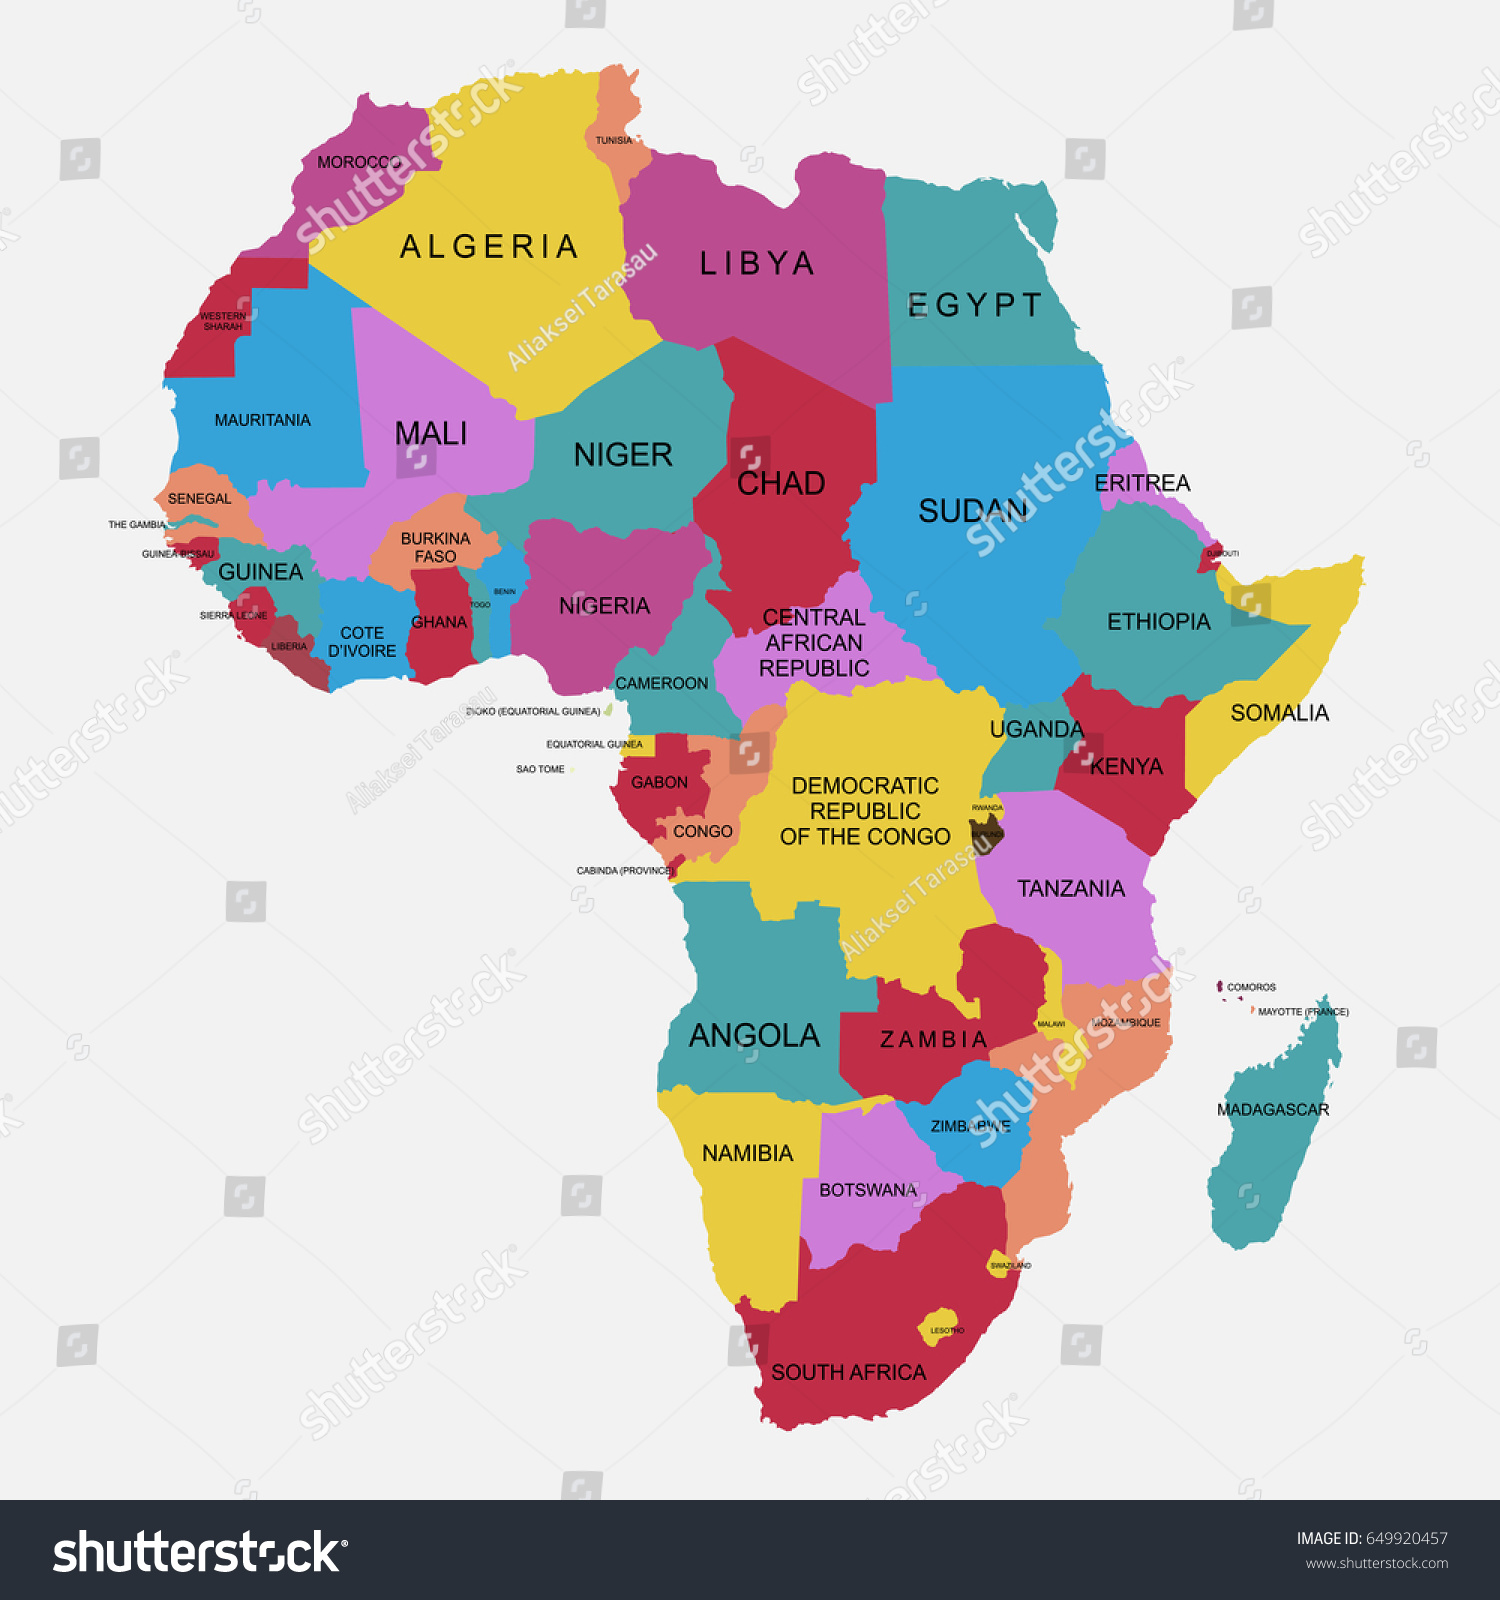 Map Of Africa Vector Illustration Royalty Free Stock Vector 649920457 5848